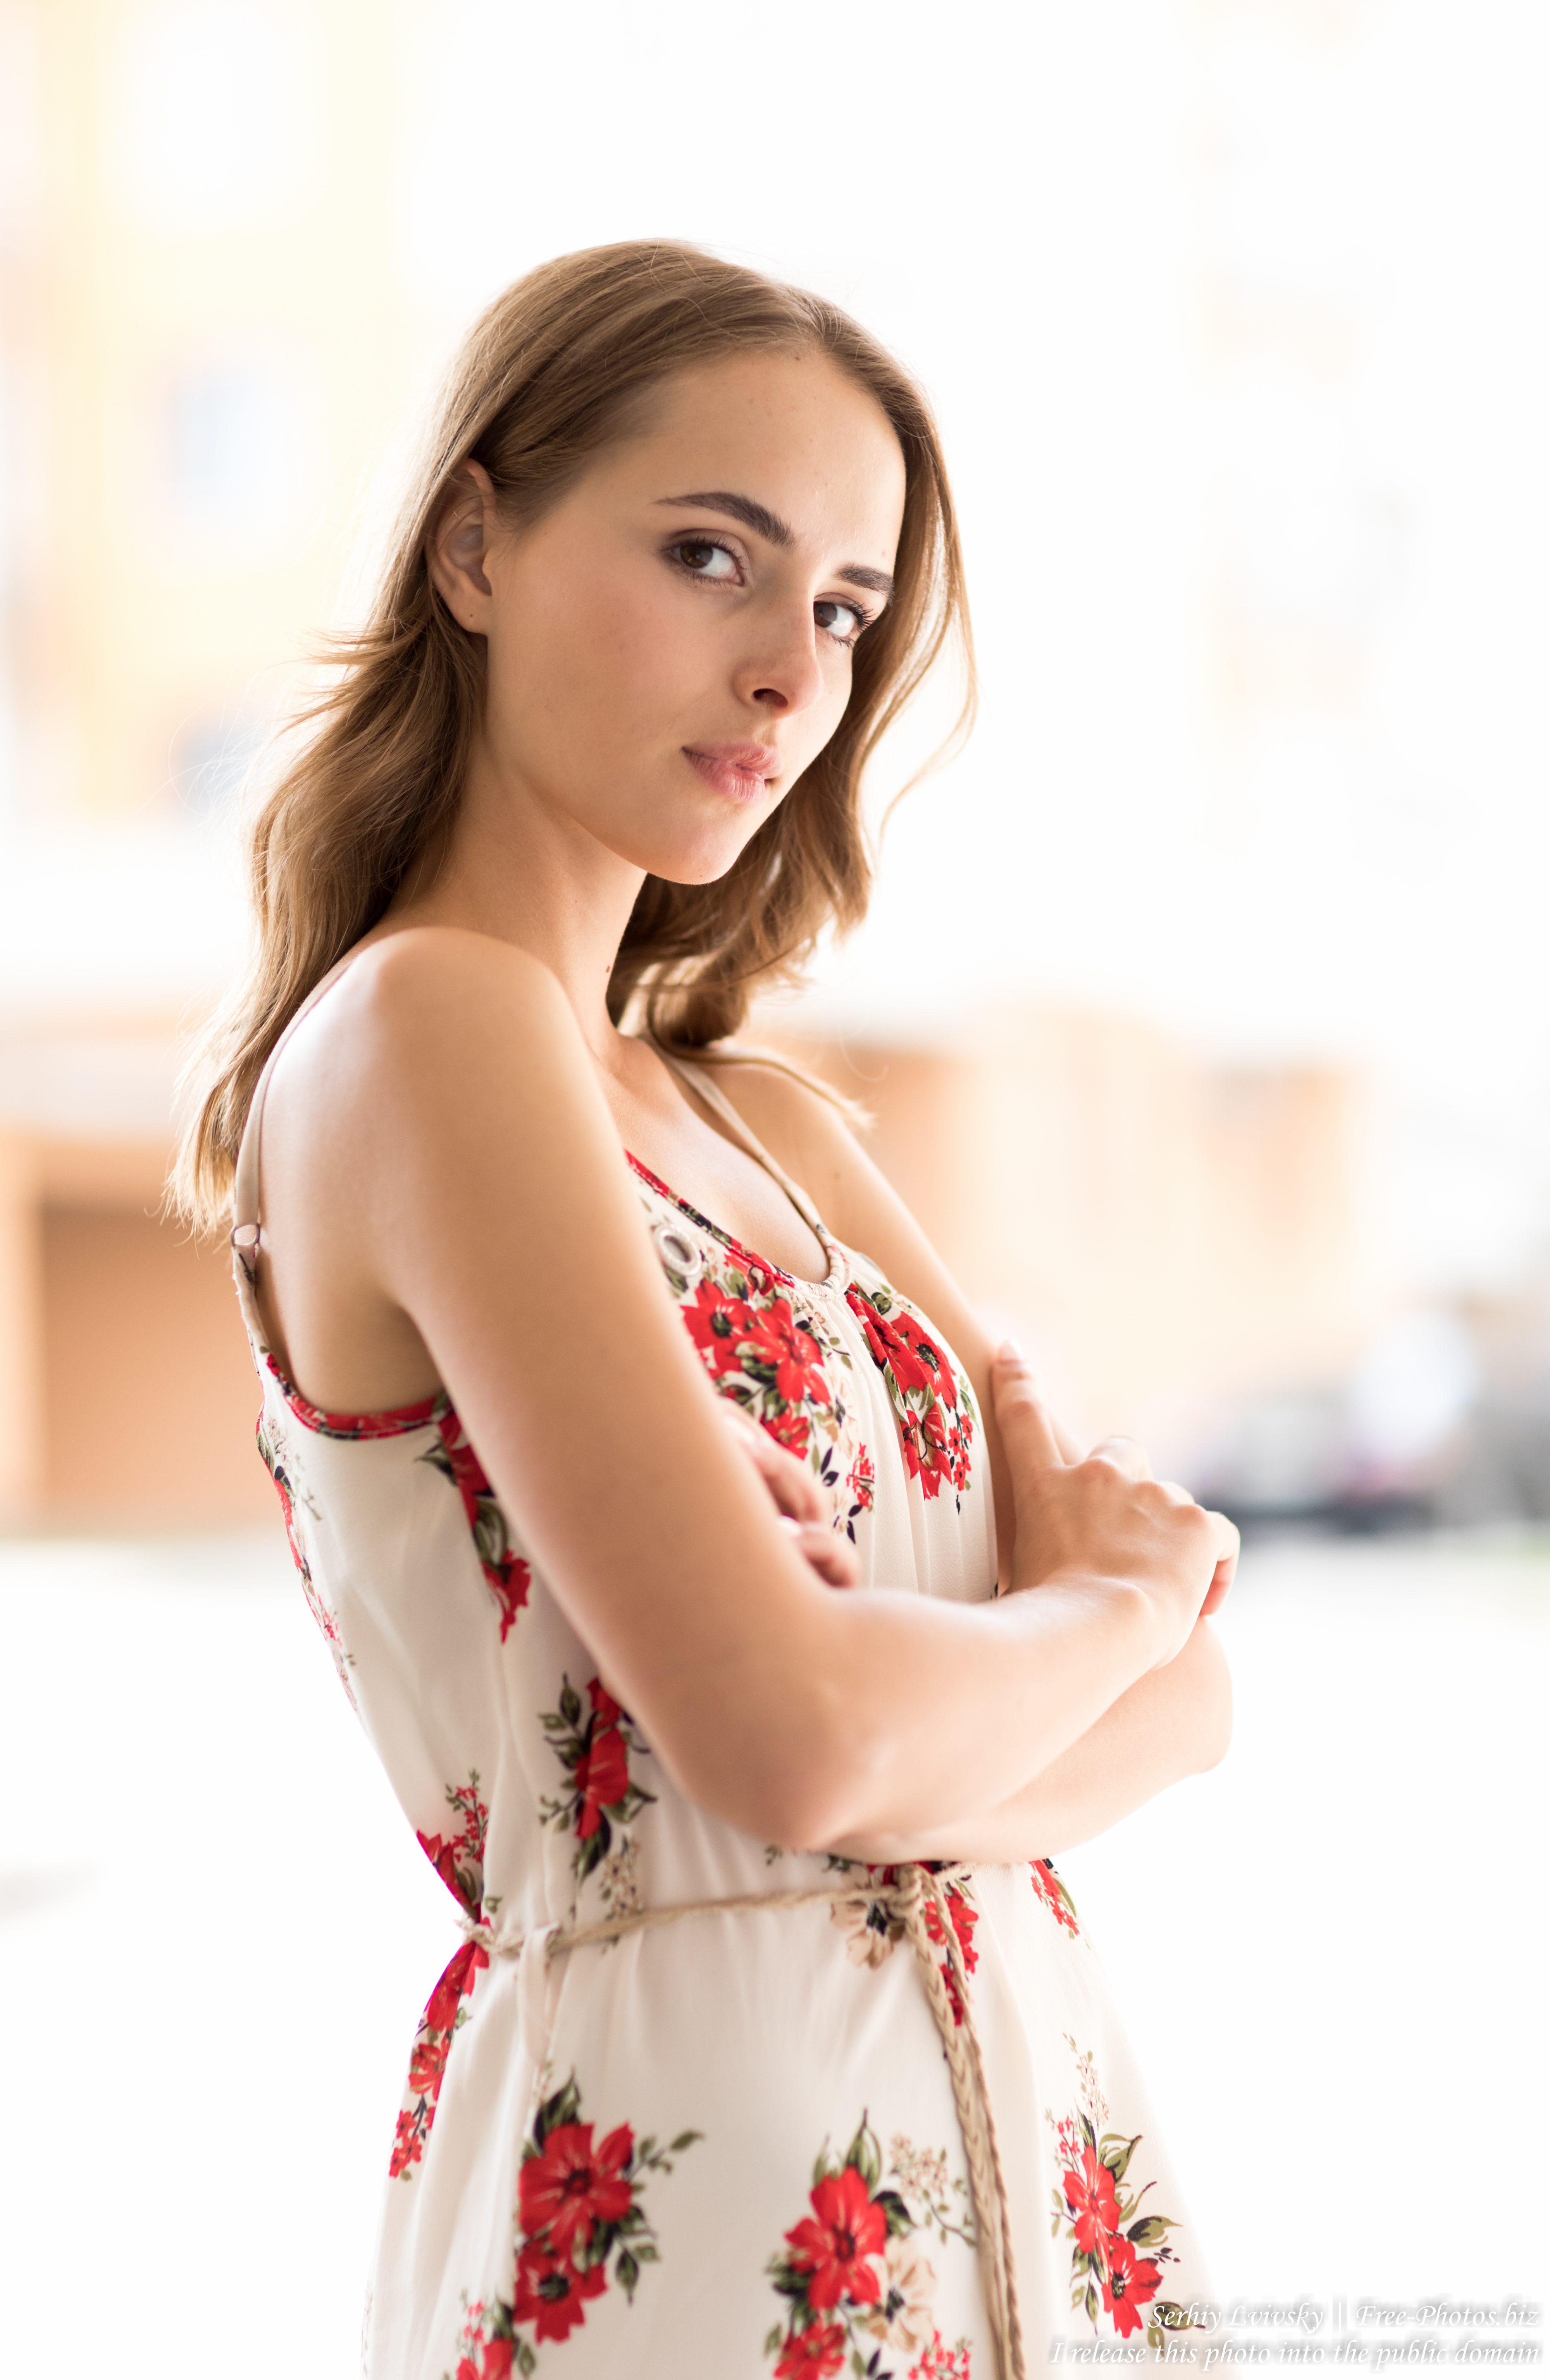 anna_a_20-year-old_fair-haired_girl_photographed_in_september_2019_by_serhiy_lvivsky_03